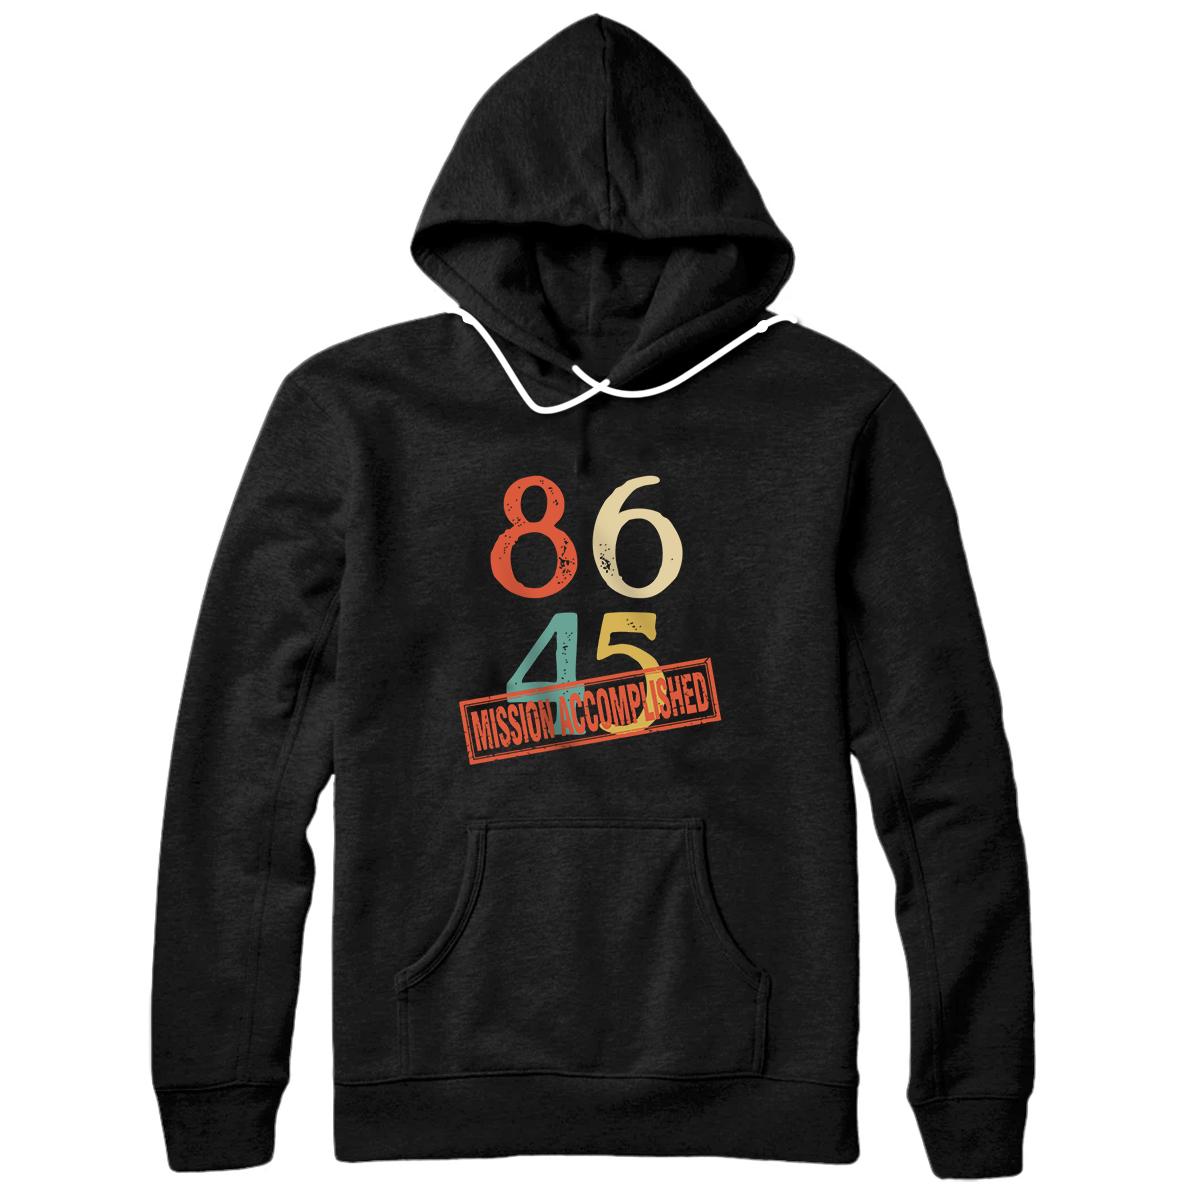 Personalized 8645 anti POTUS #45, vote Trump out! Mission accomplished Pullover Hoodie